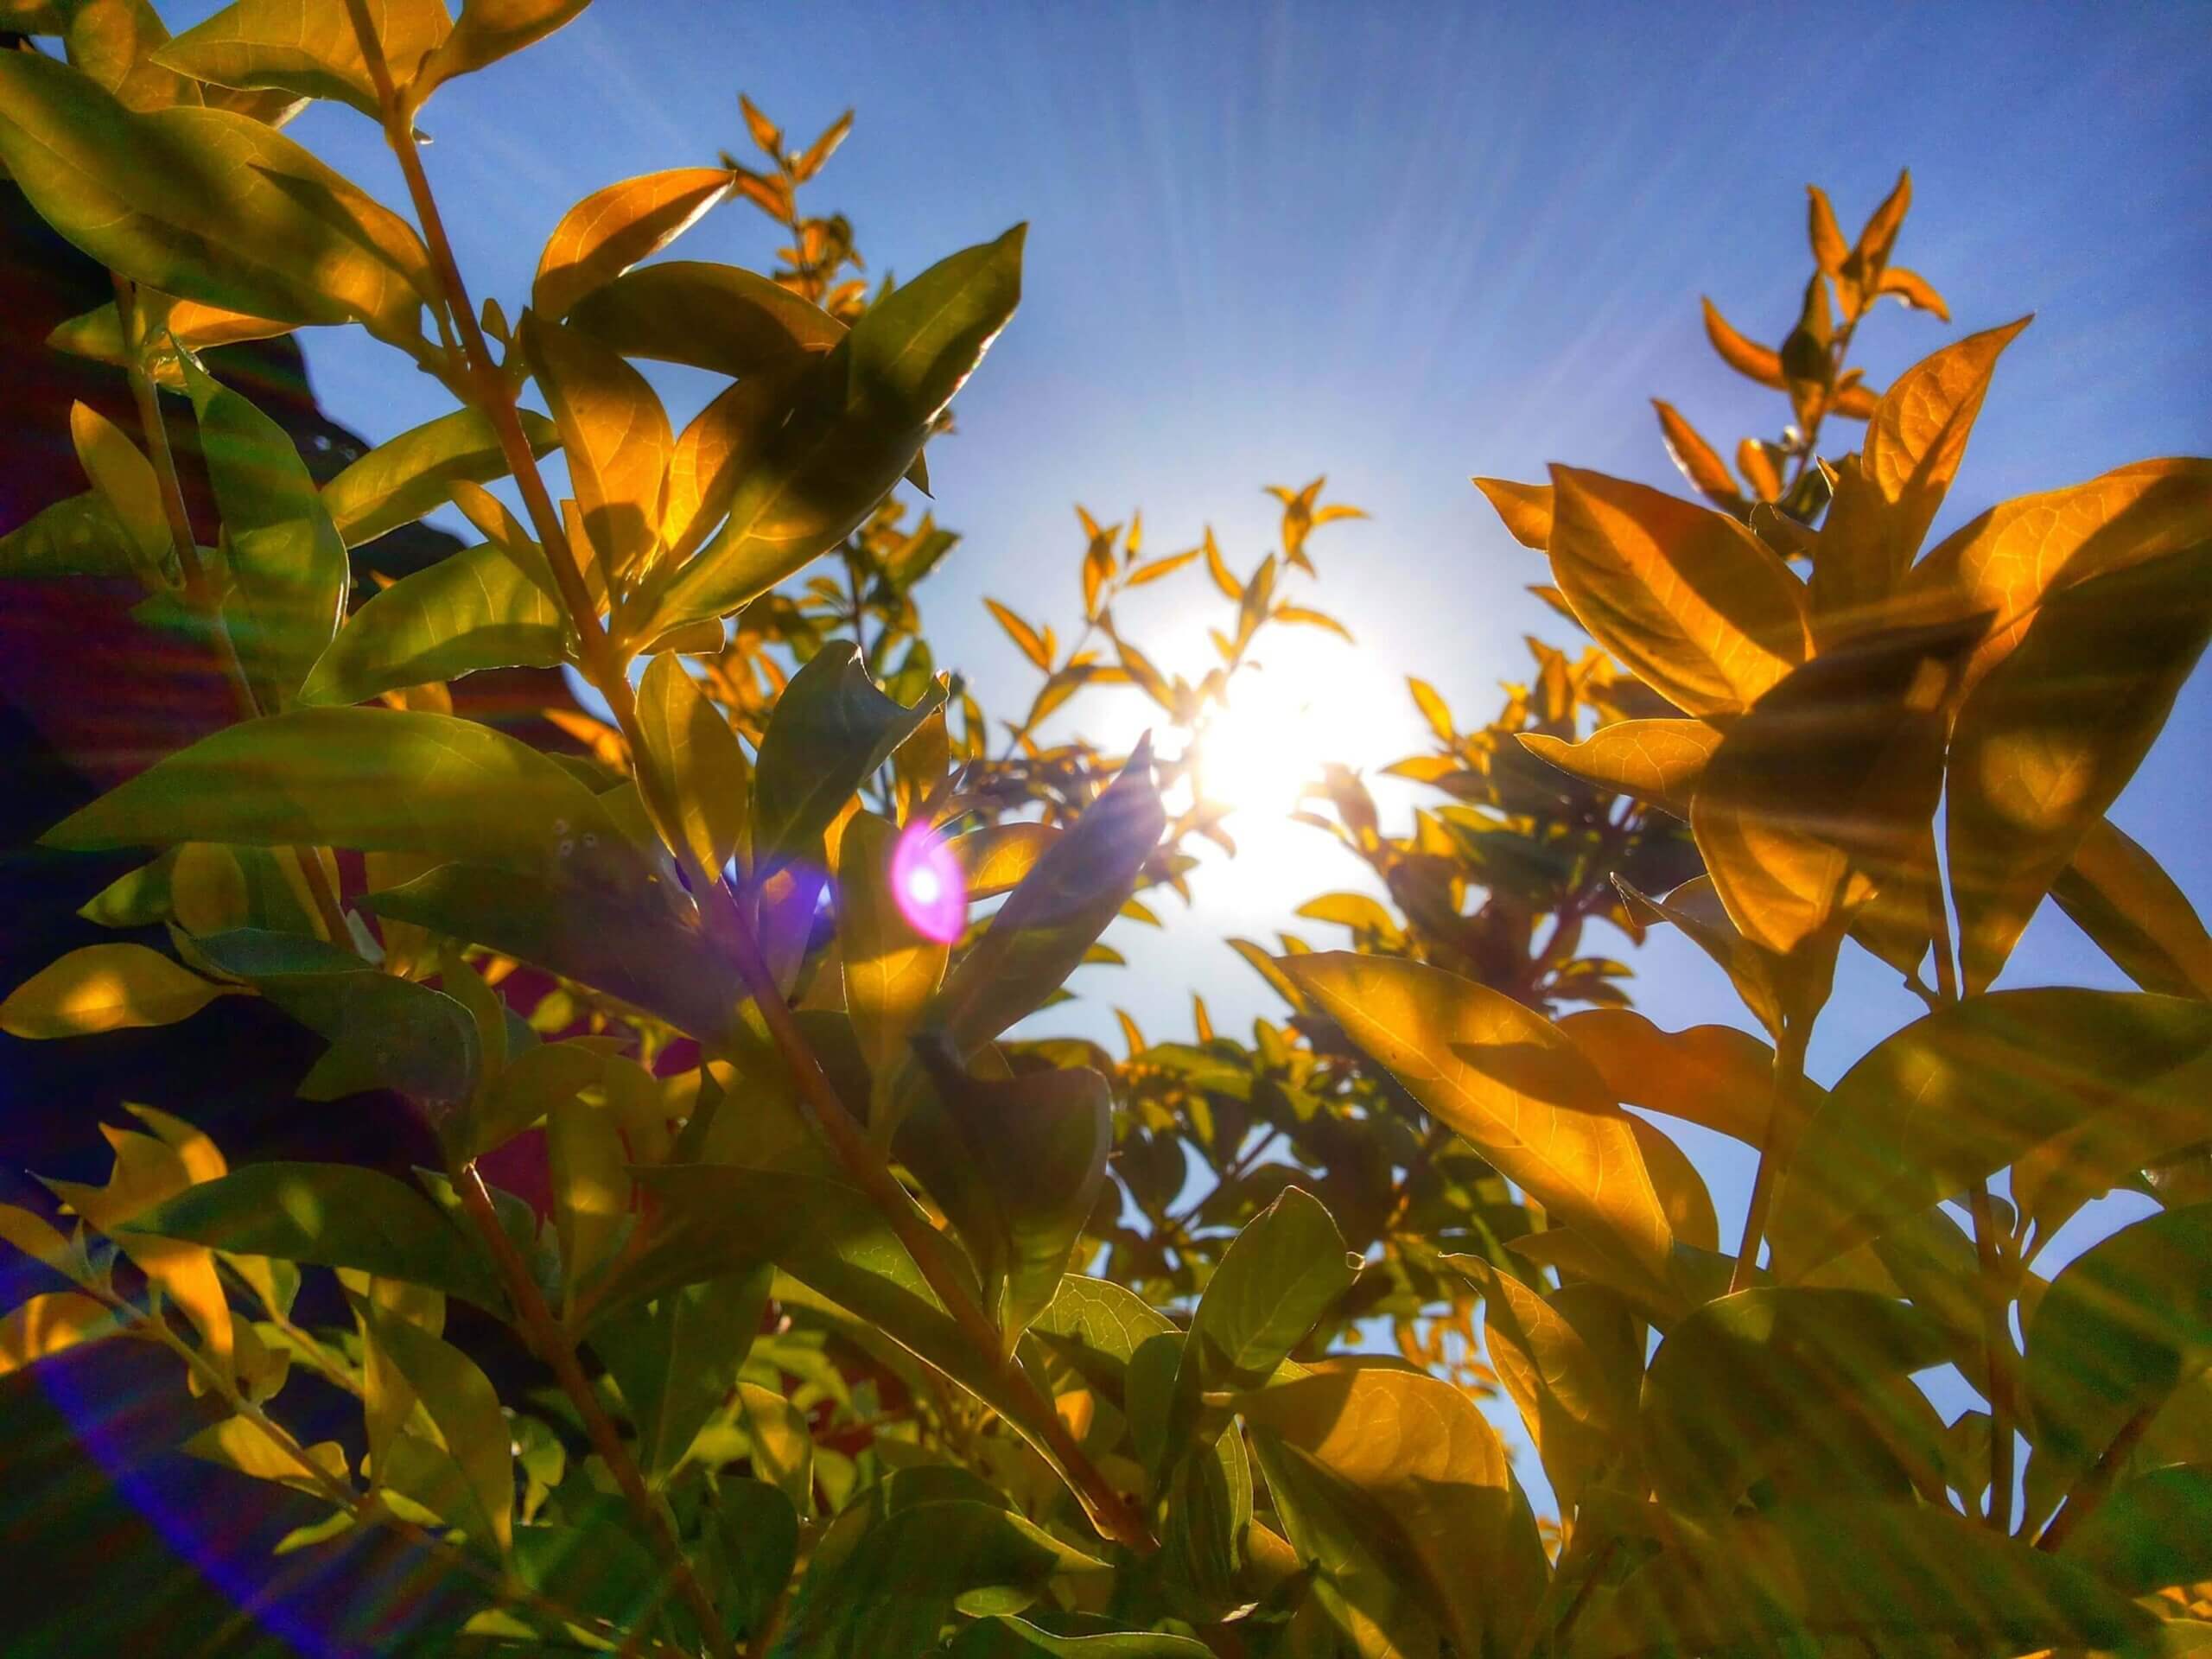 The Sun and herbs, two key elements in ayurveda